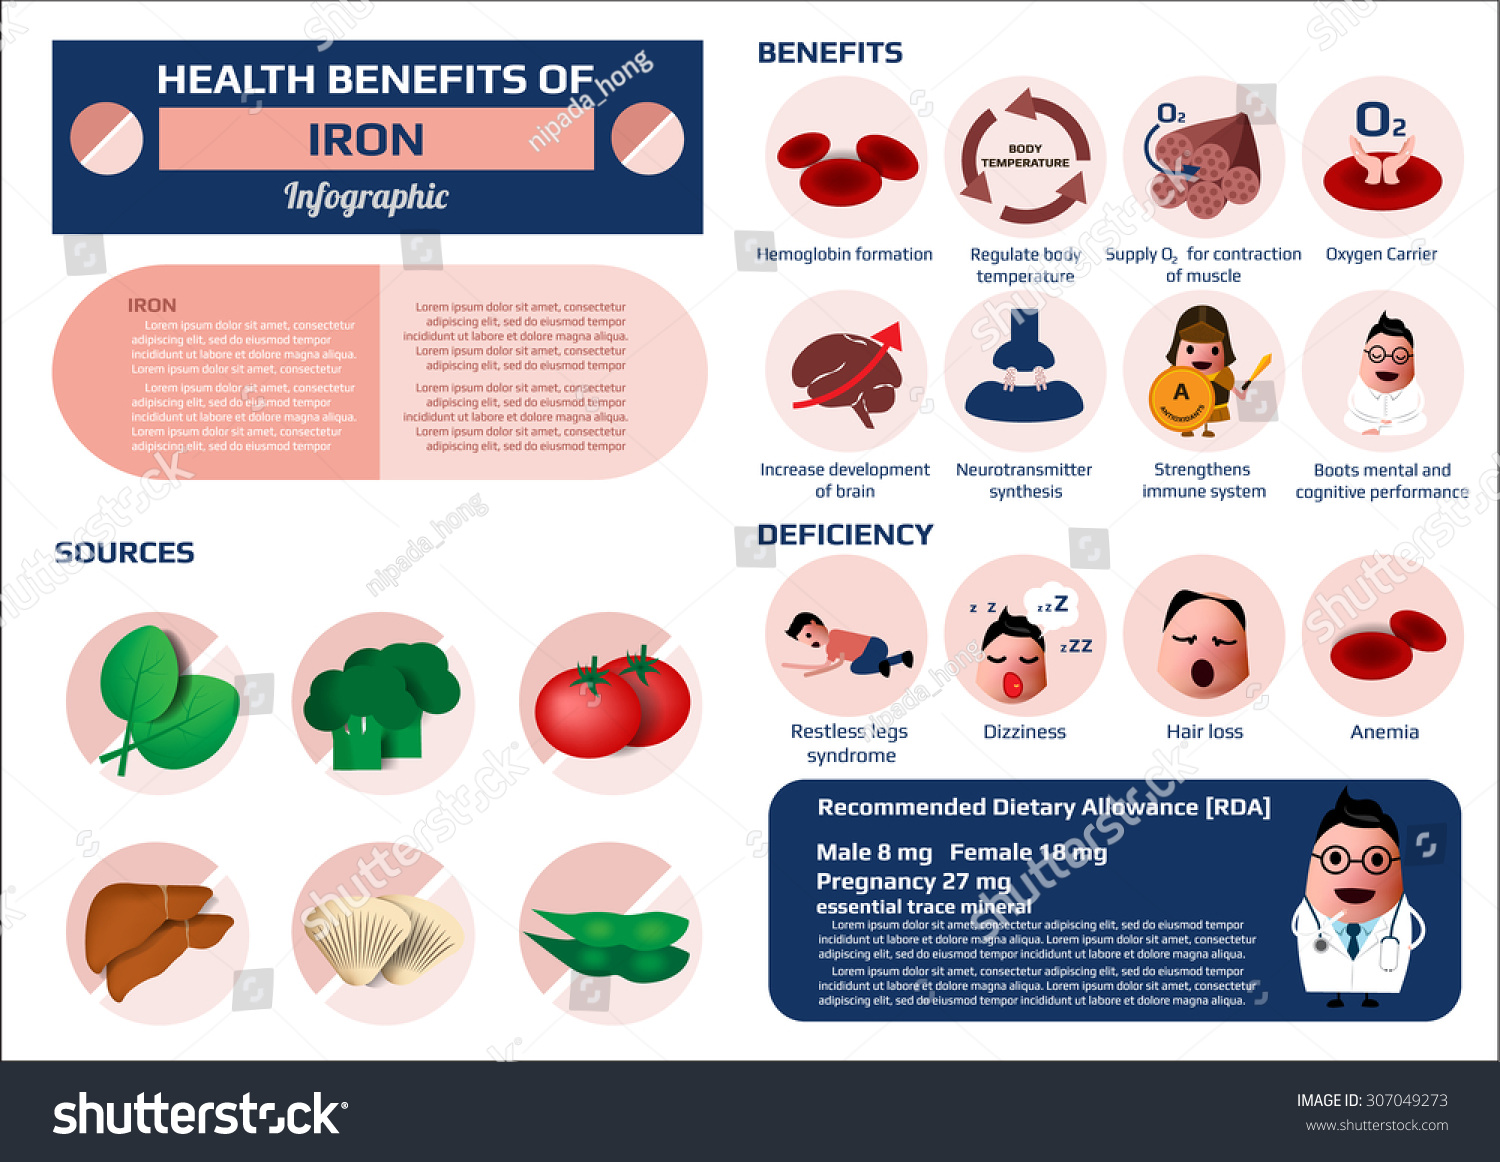 SVG of health benefits of iron or ferrous supplement infographic, vector illustration. svg